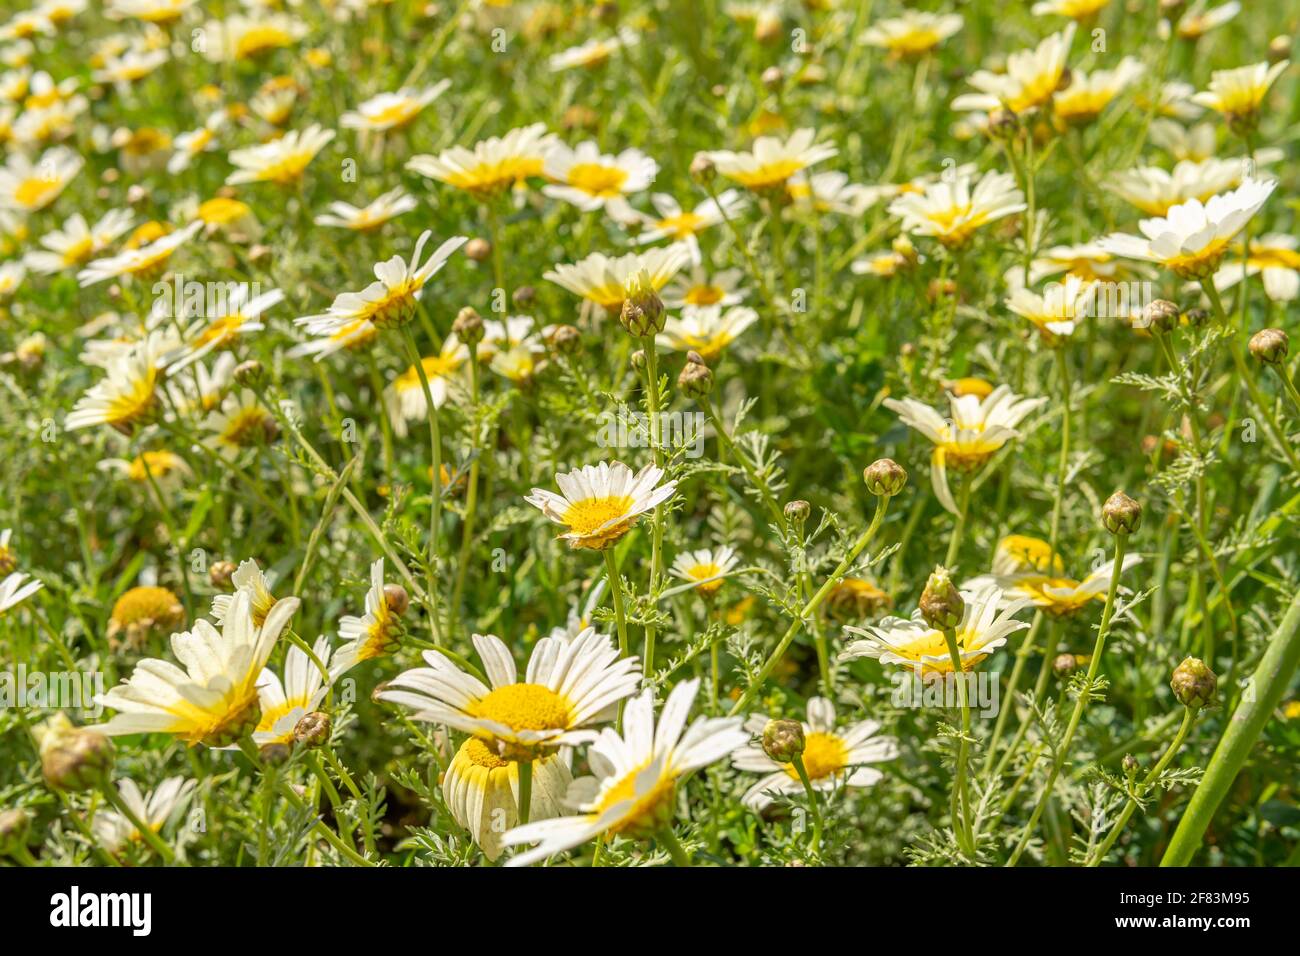 Field of wild white Mediterranean daisies (Argyranthemum frutescens) on a sunny morning with insects Stock Photo